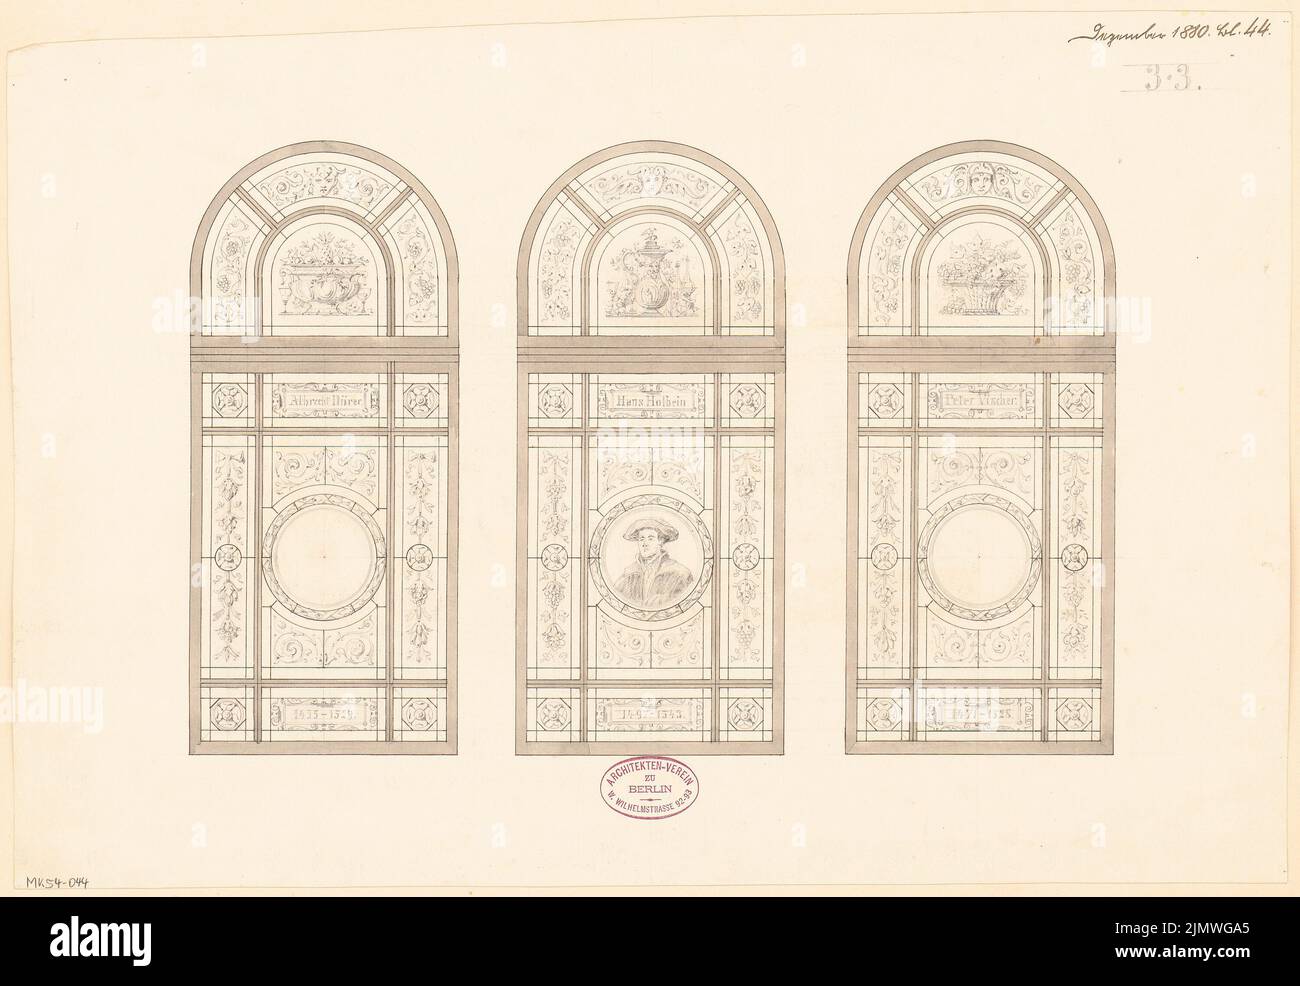 Unknown architect, window for the house of the architect association in Berlin. Monthly competition December 1880 (1st competition) (12,1880): 3 views. Ink and pencil watercolored on the box, 34 x 49.4 cm (including scan edges) N.N. : Fenster für das Haus des Architekten-Vereins zu Berlin. Monatskonkurrenz Dezember 1880 (1. Wettbewerb) Stock Photo